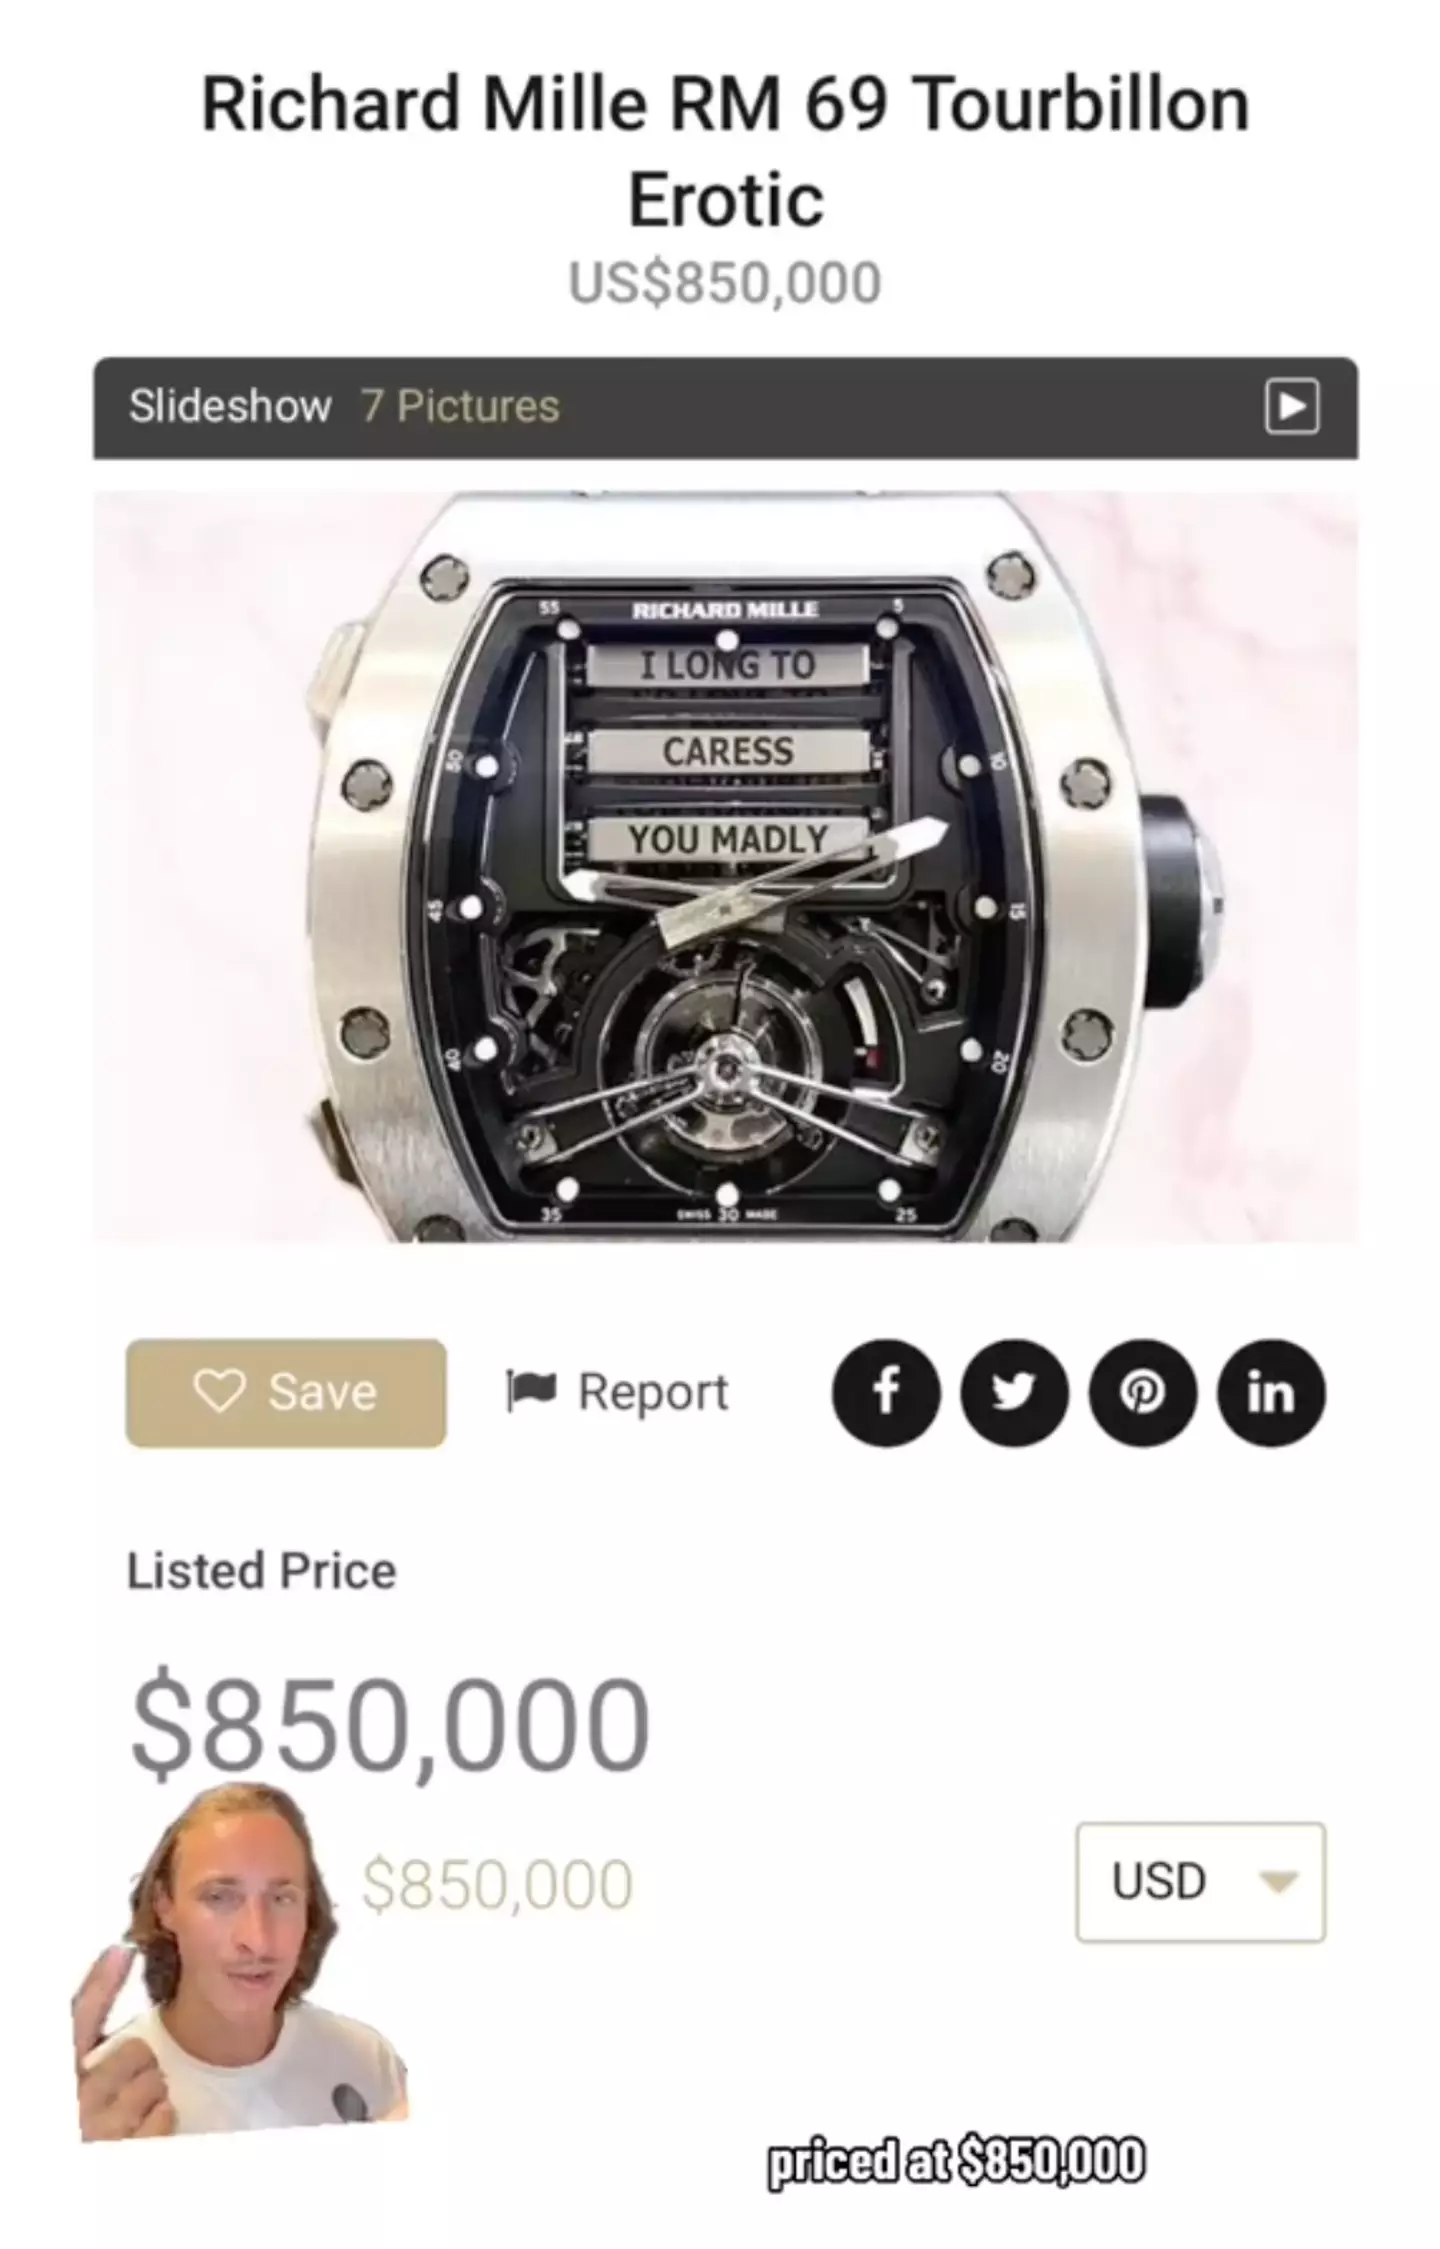 The most expensive watch in the video.